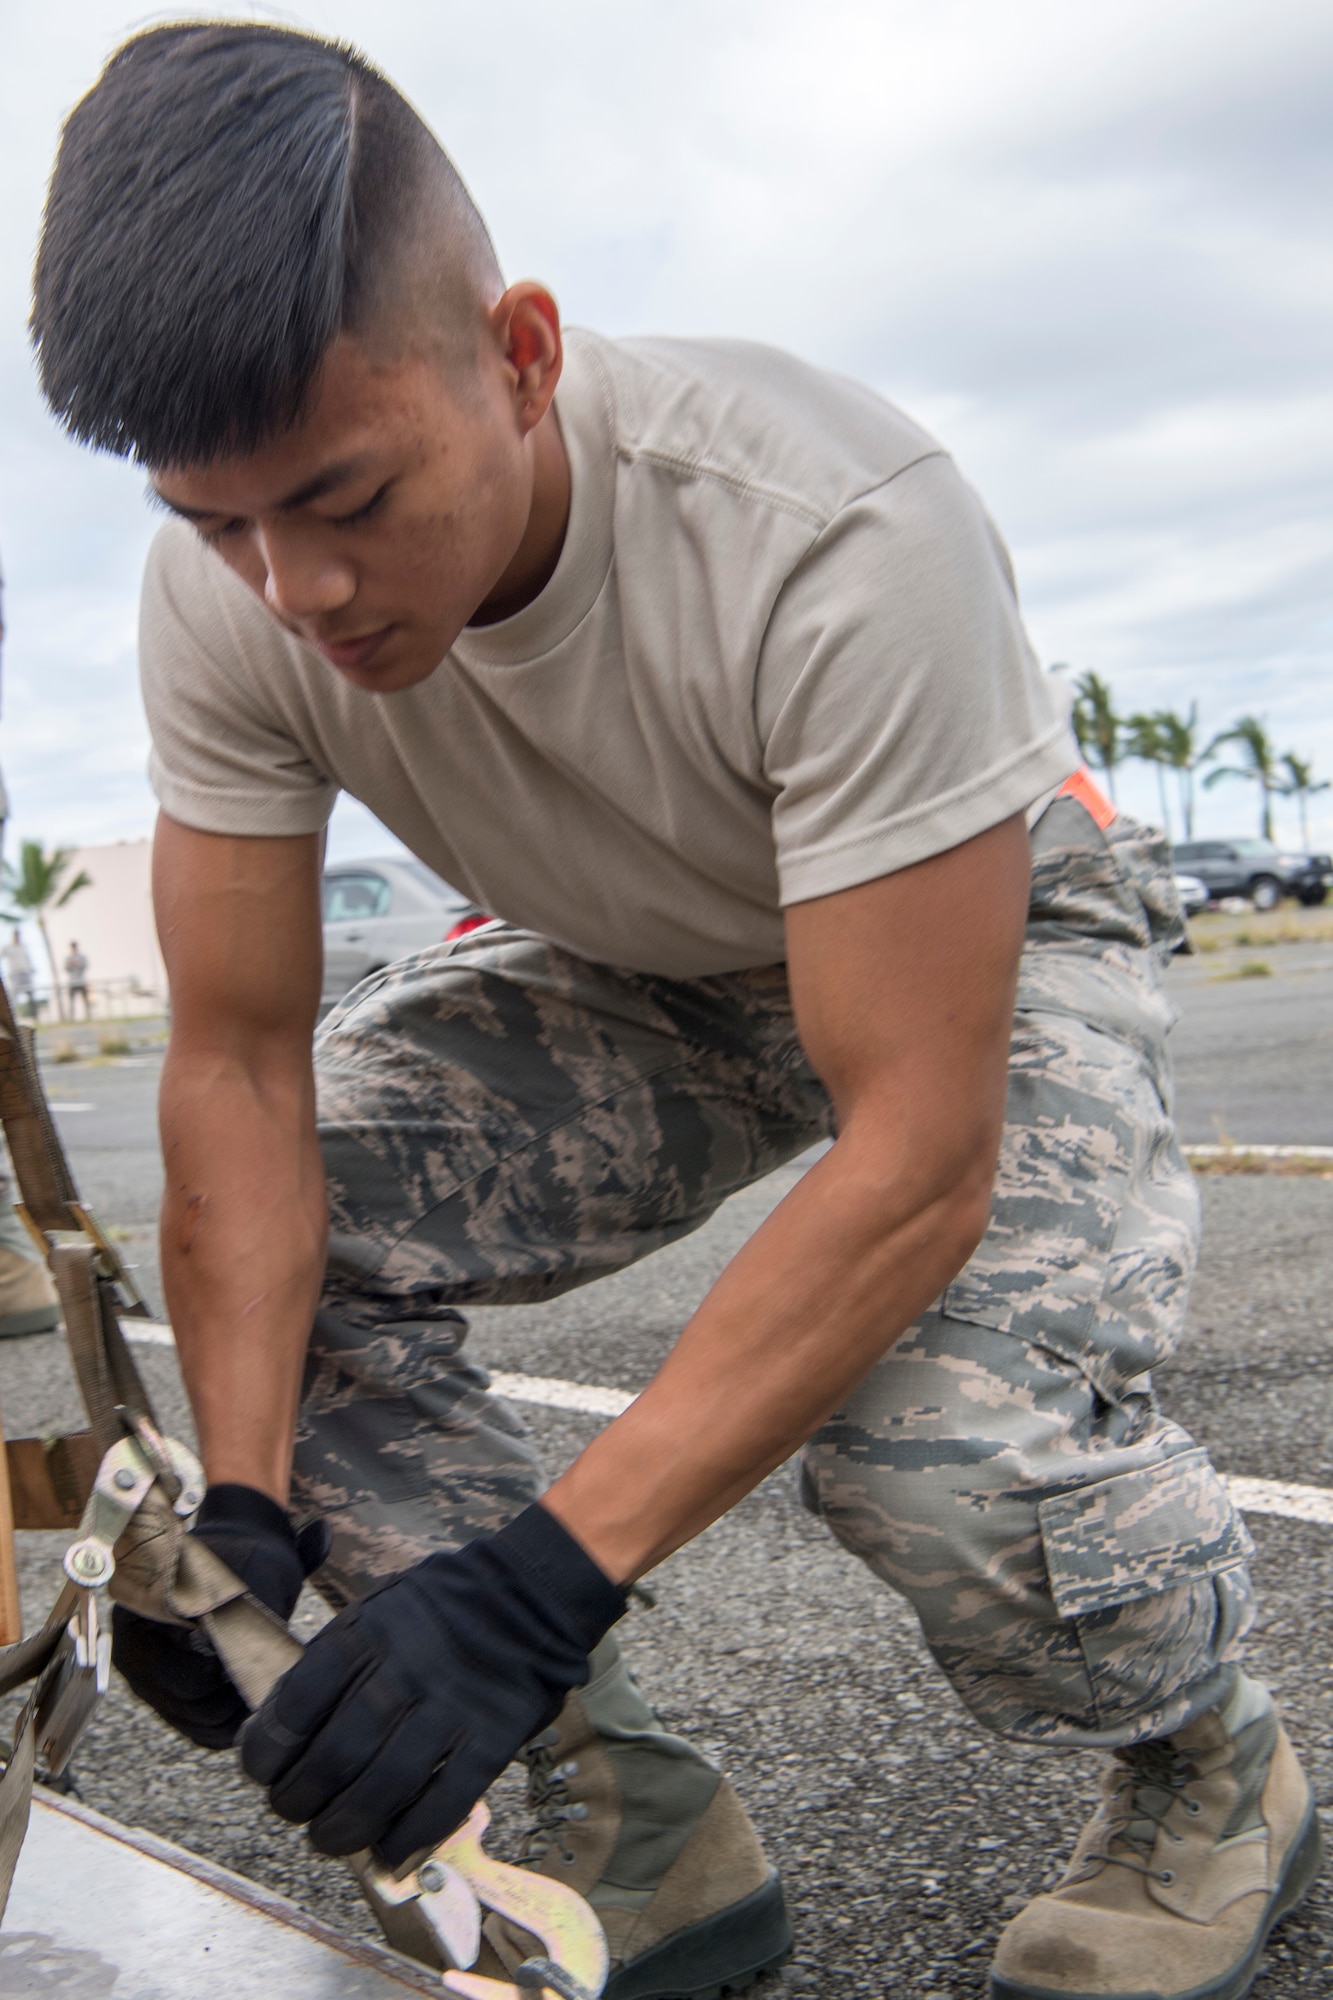 U.S. Air Force Senior Airman John Bonilla, a member of the Air Force Reserve’s 48th Aerial Port Squadron, straps down equipment during a pallet building training exercise designed to perfect his skills as air transportation specialist Oct. 13, 2018, at Joint Base Pearl Harbor-Hickam, Hawaii. The 48th APS, which is part of the 624th Regional Support Group, deploys qualified personnel to provide air terminal operations worldwide in support of contingency operations, exercises, unit moves, and foreign humanitarian relief or disaster operations. (U.S. Air Force photo by Master Sgt. Theanne Herrmann)